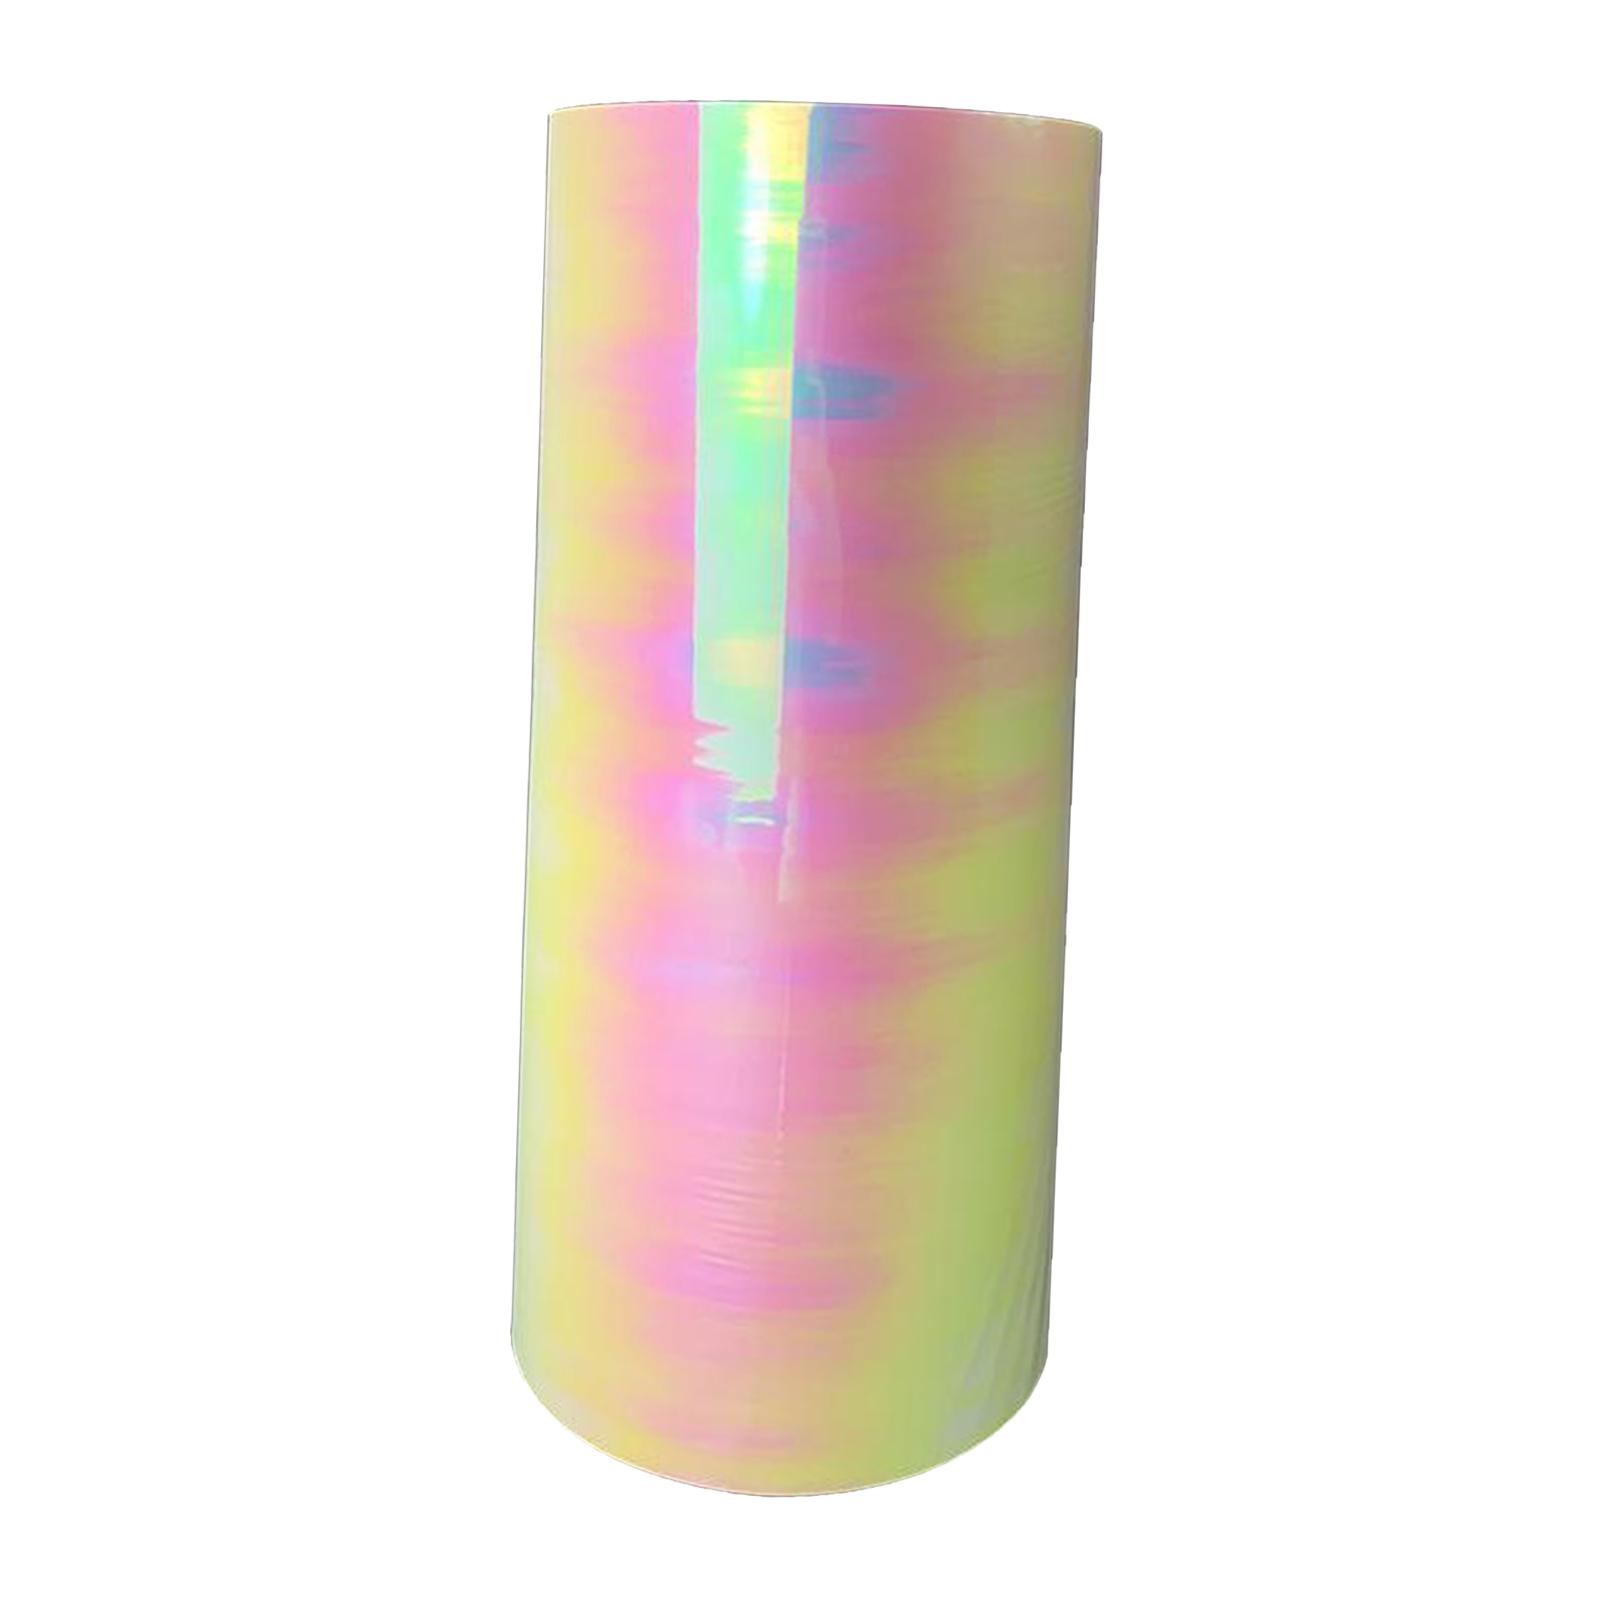 Hình ảnh Clear Glossy Rainbow Film Holographic Vinyl  Paper for Package Bag Sewing Bow Craft Applique Plotters Bag DIY